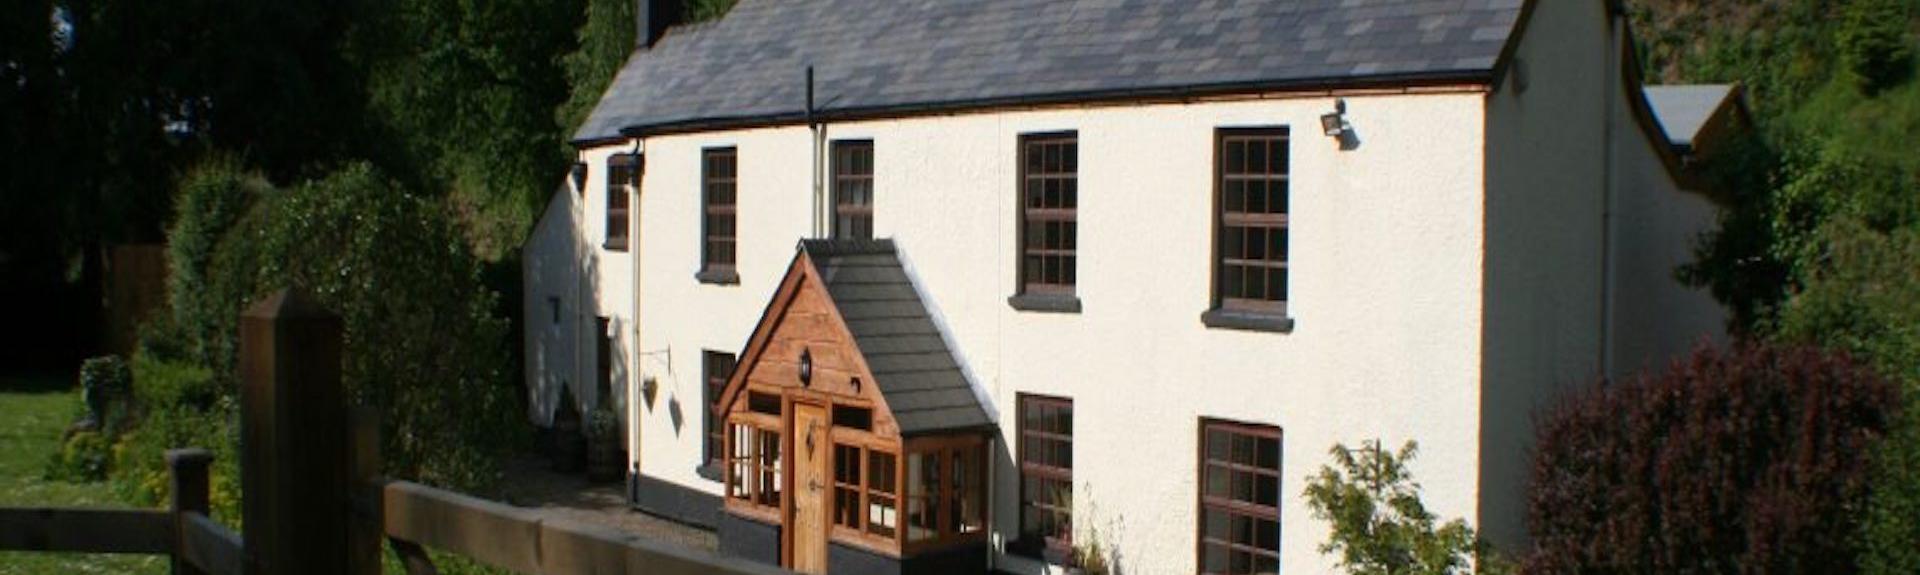 The Anchor - a large holiday cottage in the Wye Valley